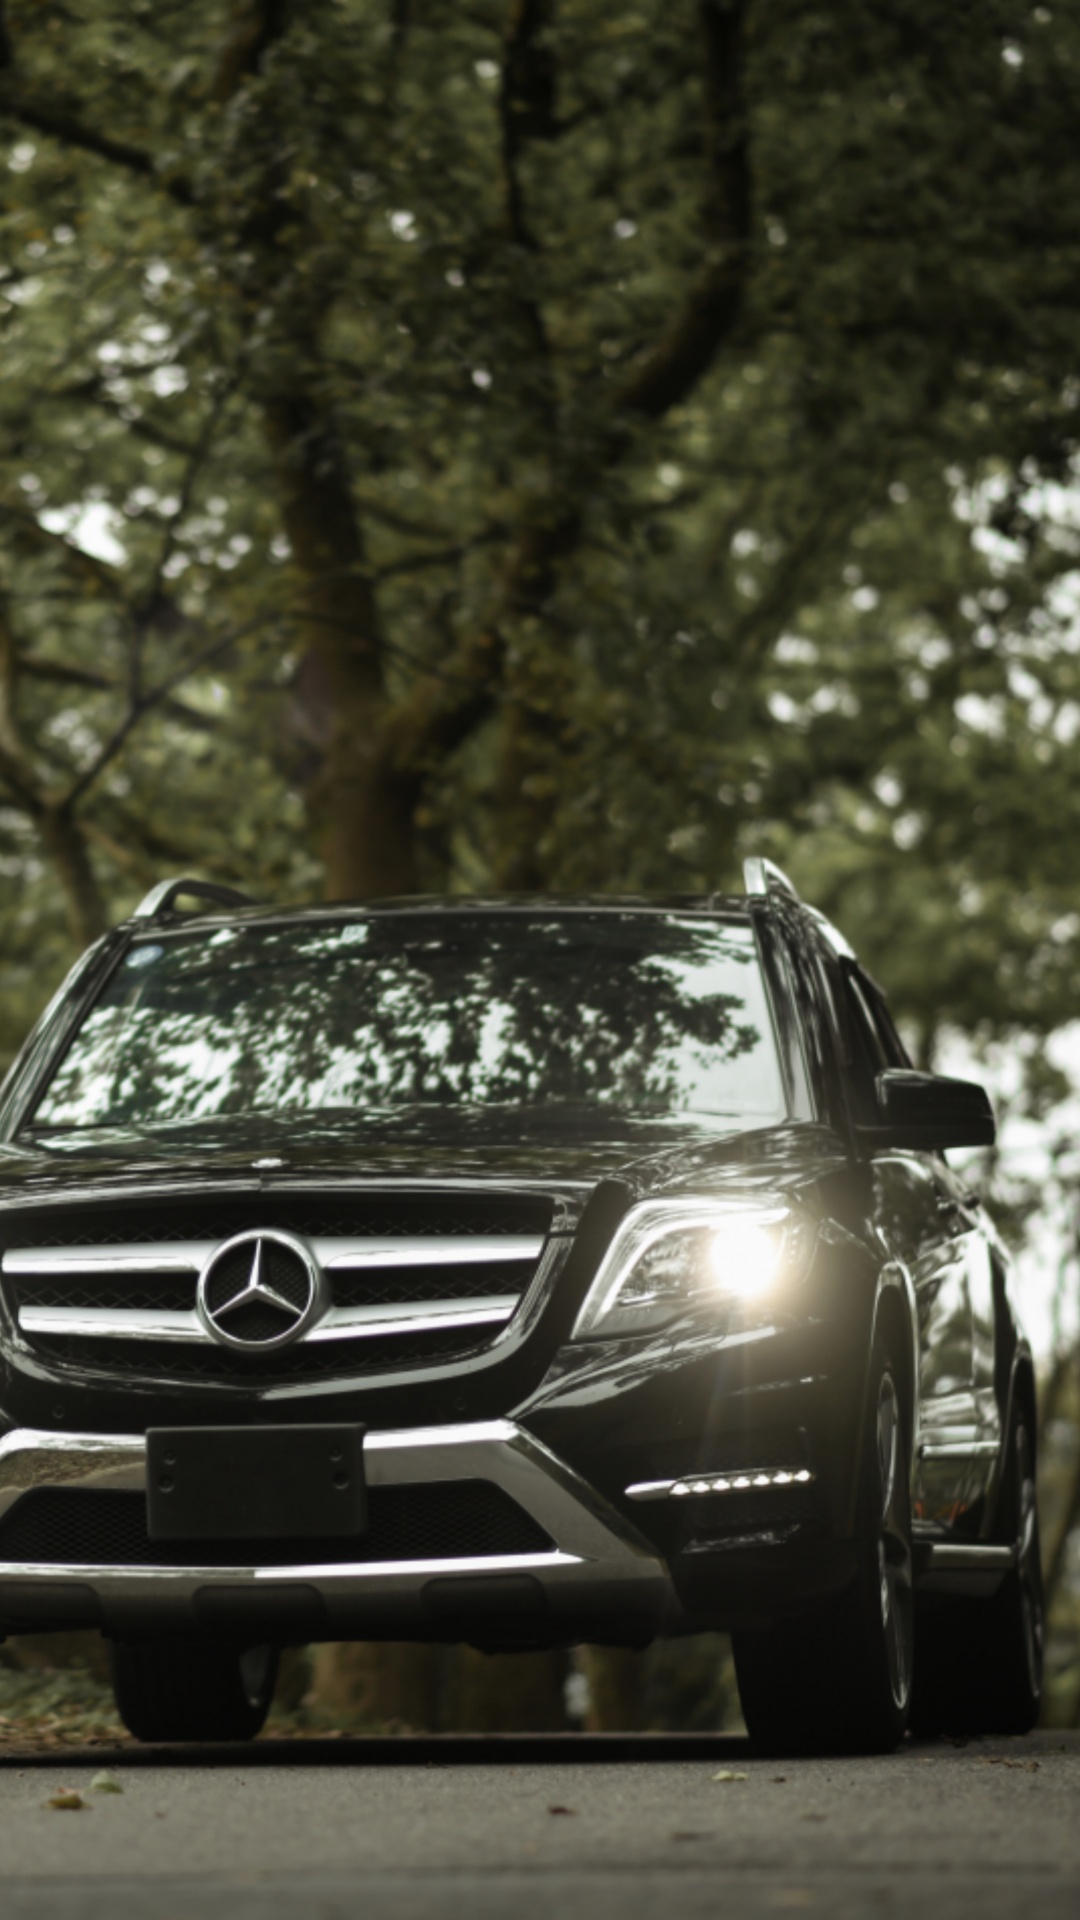 Black Mercedes Benz Car on Forest During Daytime. Wallpaper in 1080x1920 Resolution